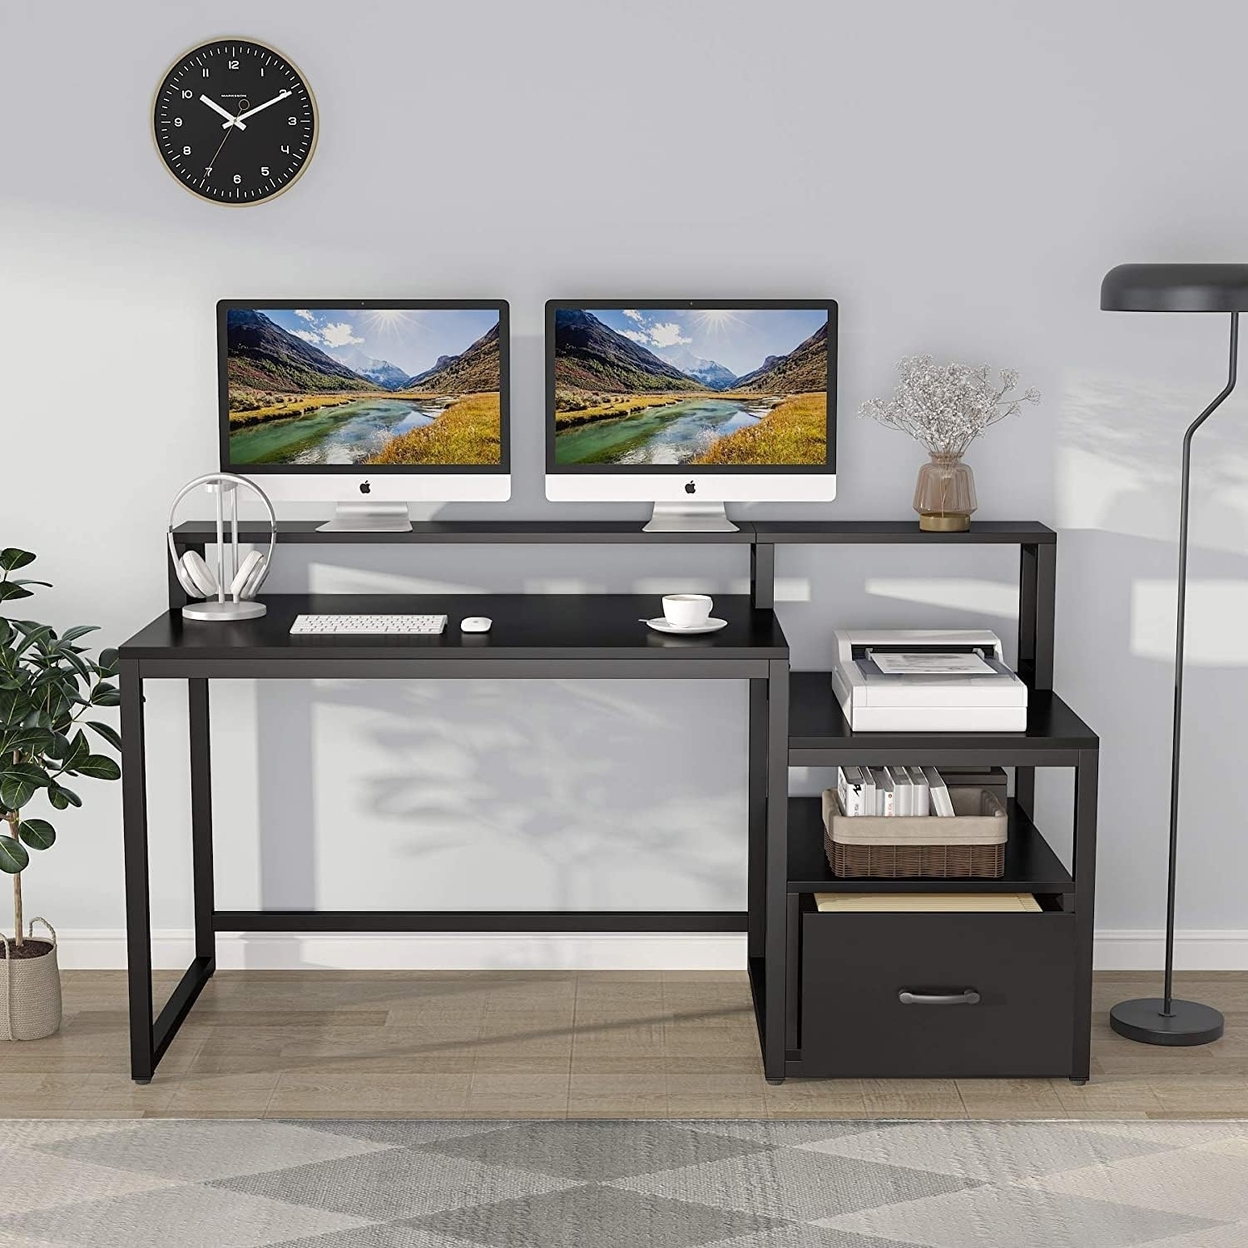 Tribesigns 60 Inch Computer Desk With Storage Shelves And File Drawer, Large Home Office Desk With Monitor Stand Riser Shelf